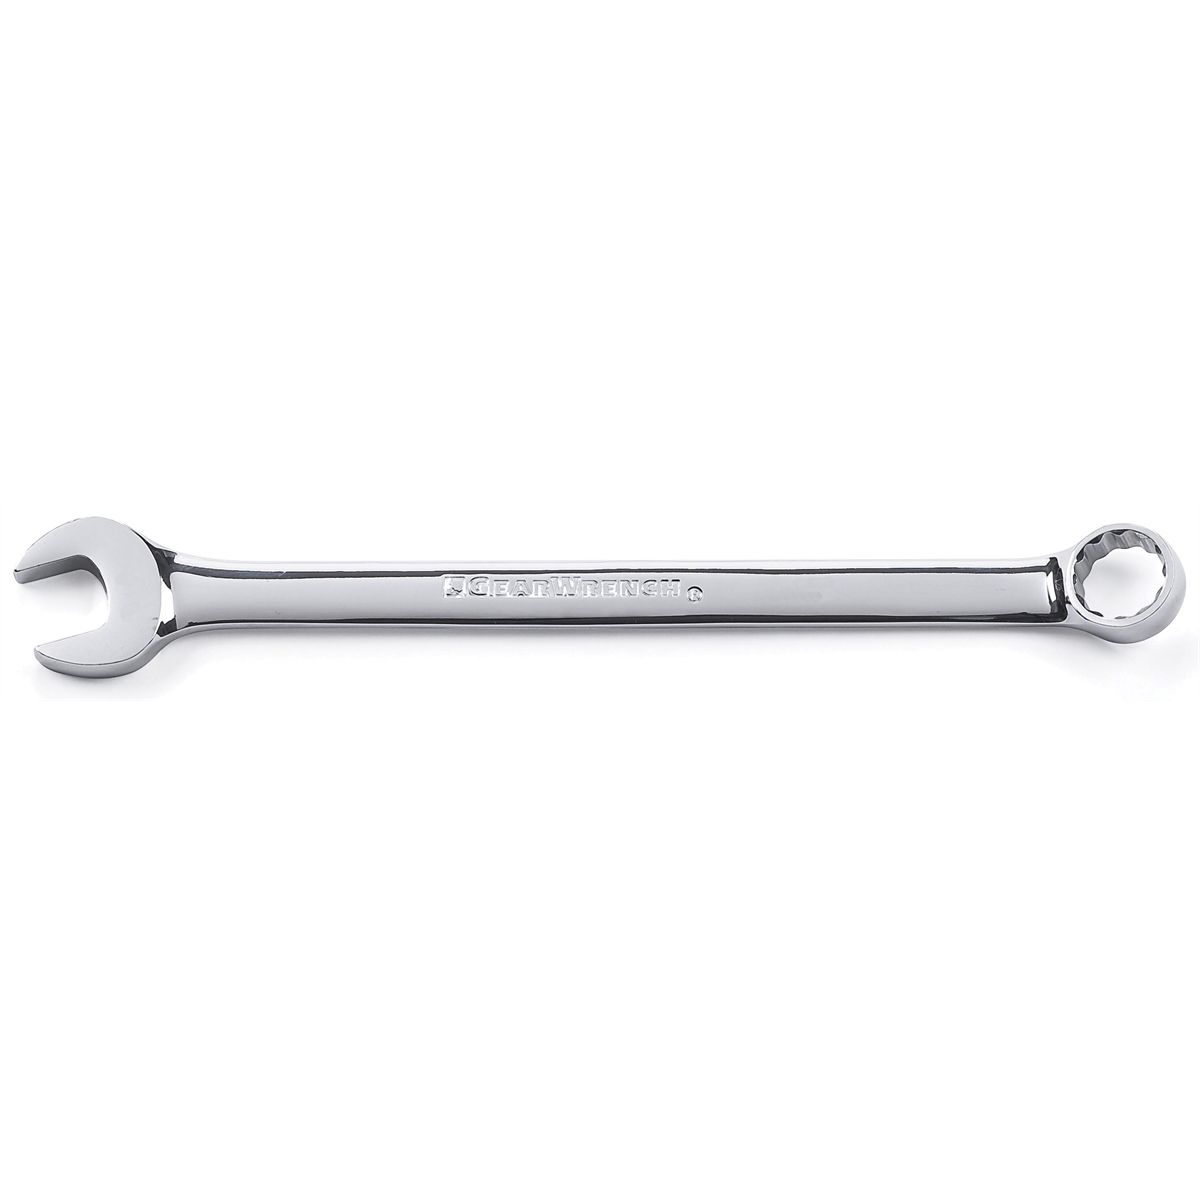 21 mm Long Pattern Combination Wrench